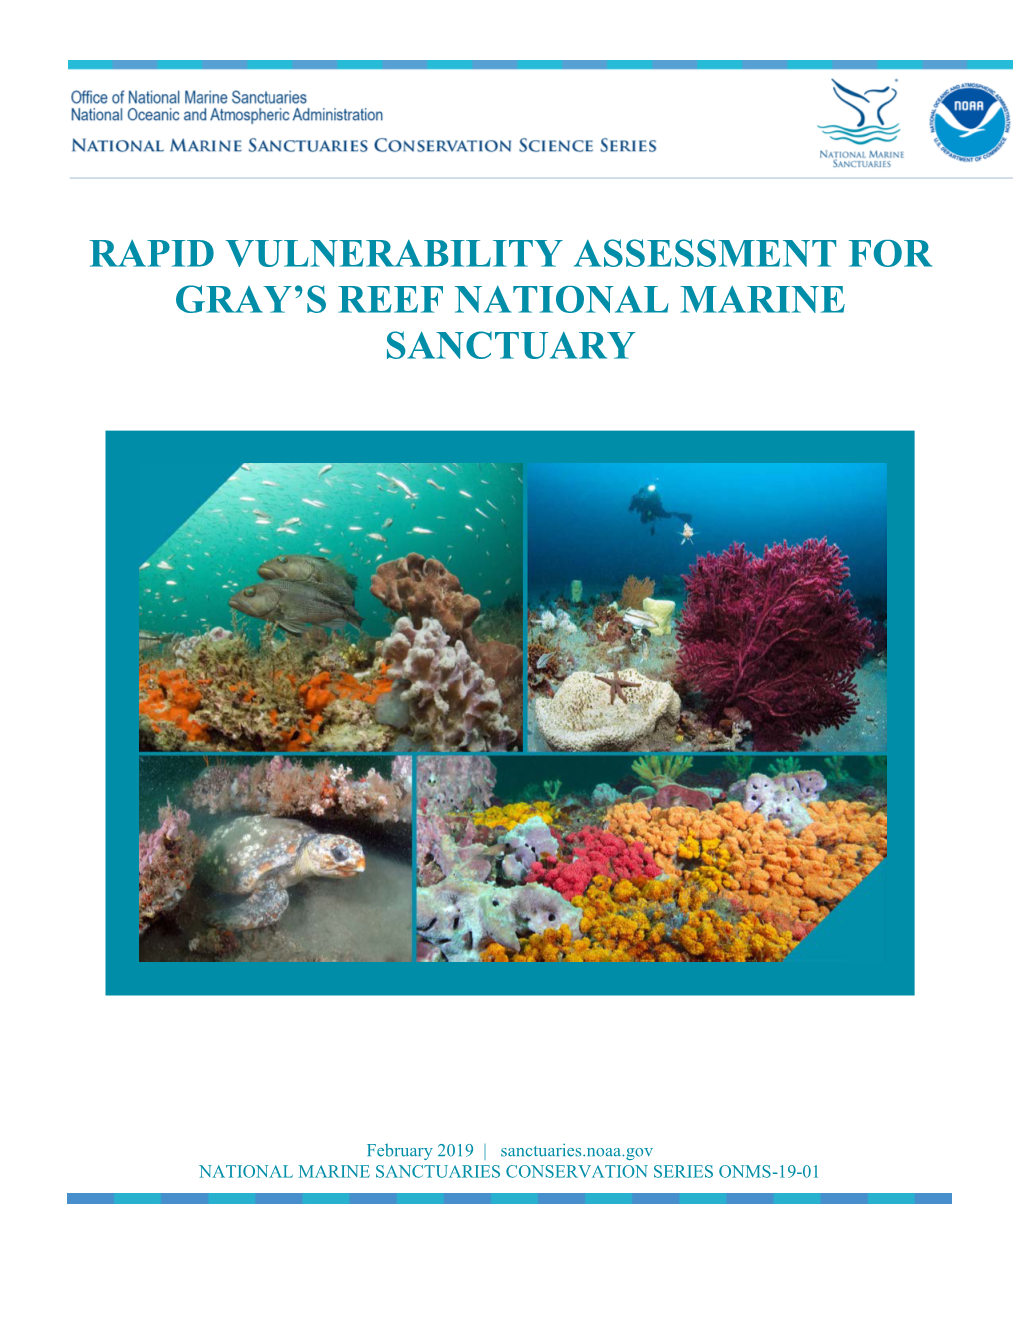 Rapid Vulnerability Assessment for Gray's Reef National Marine